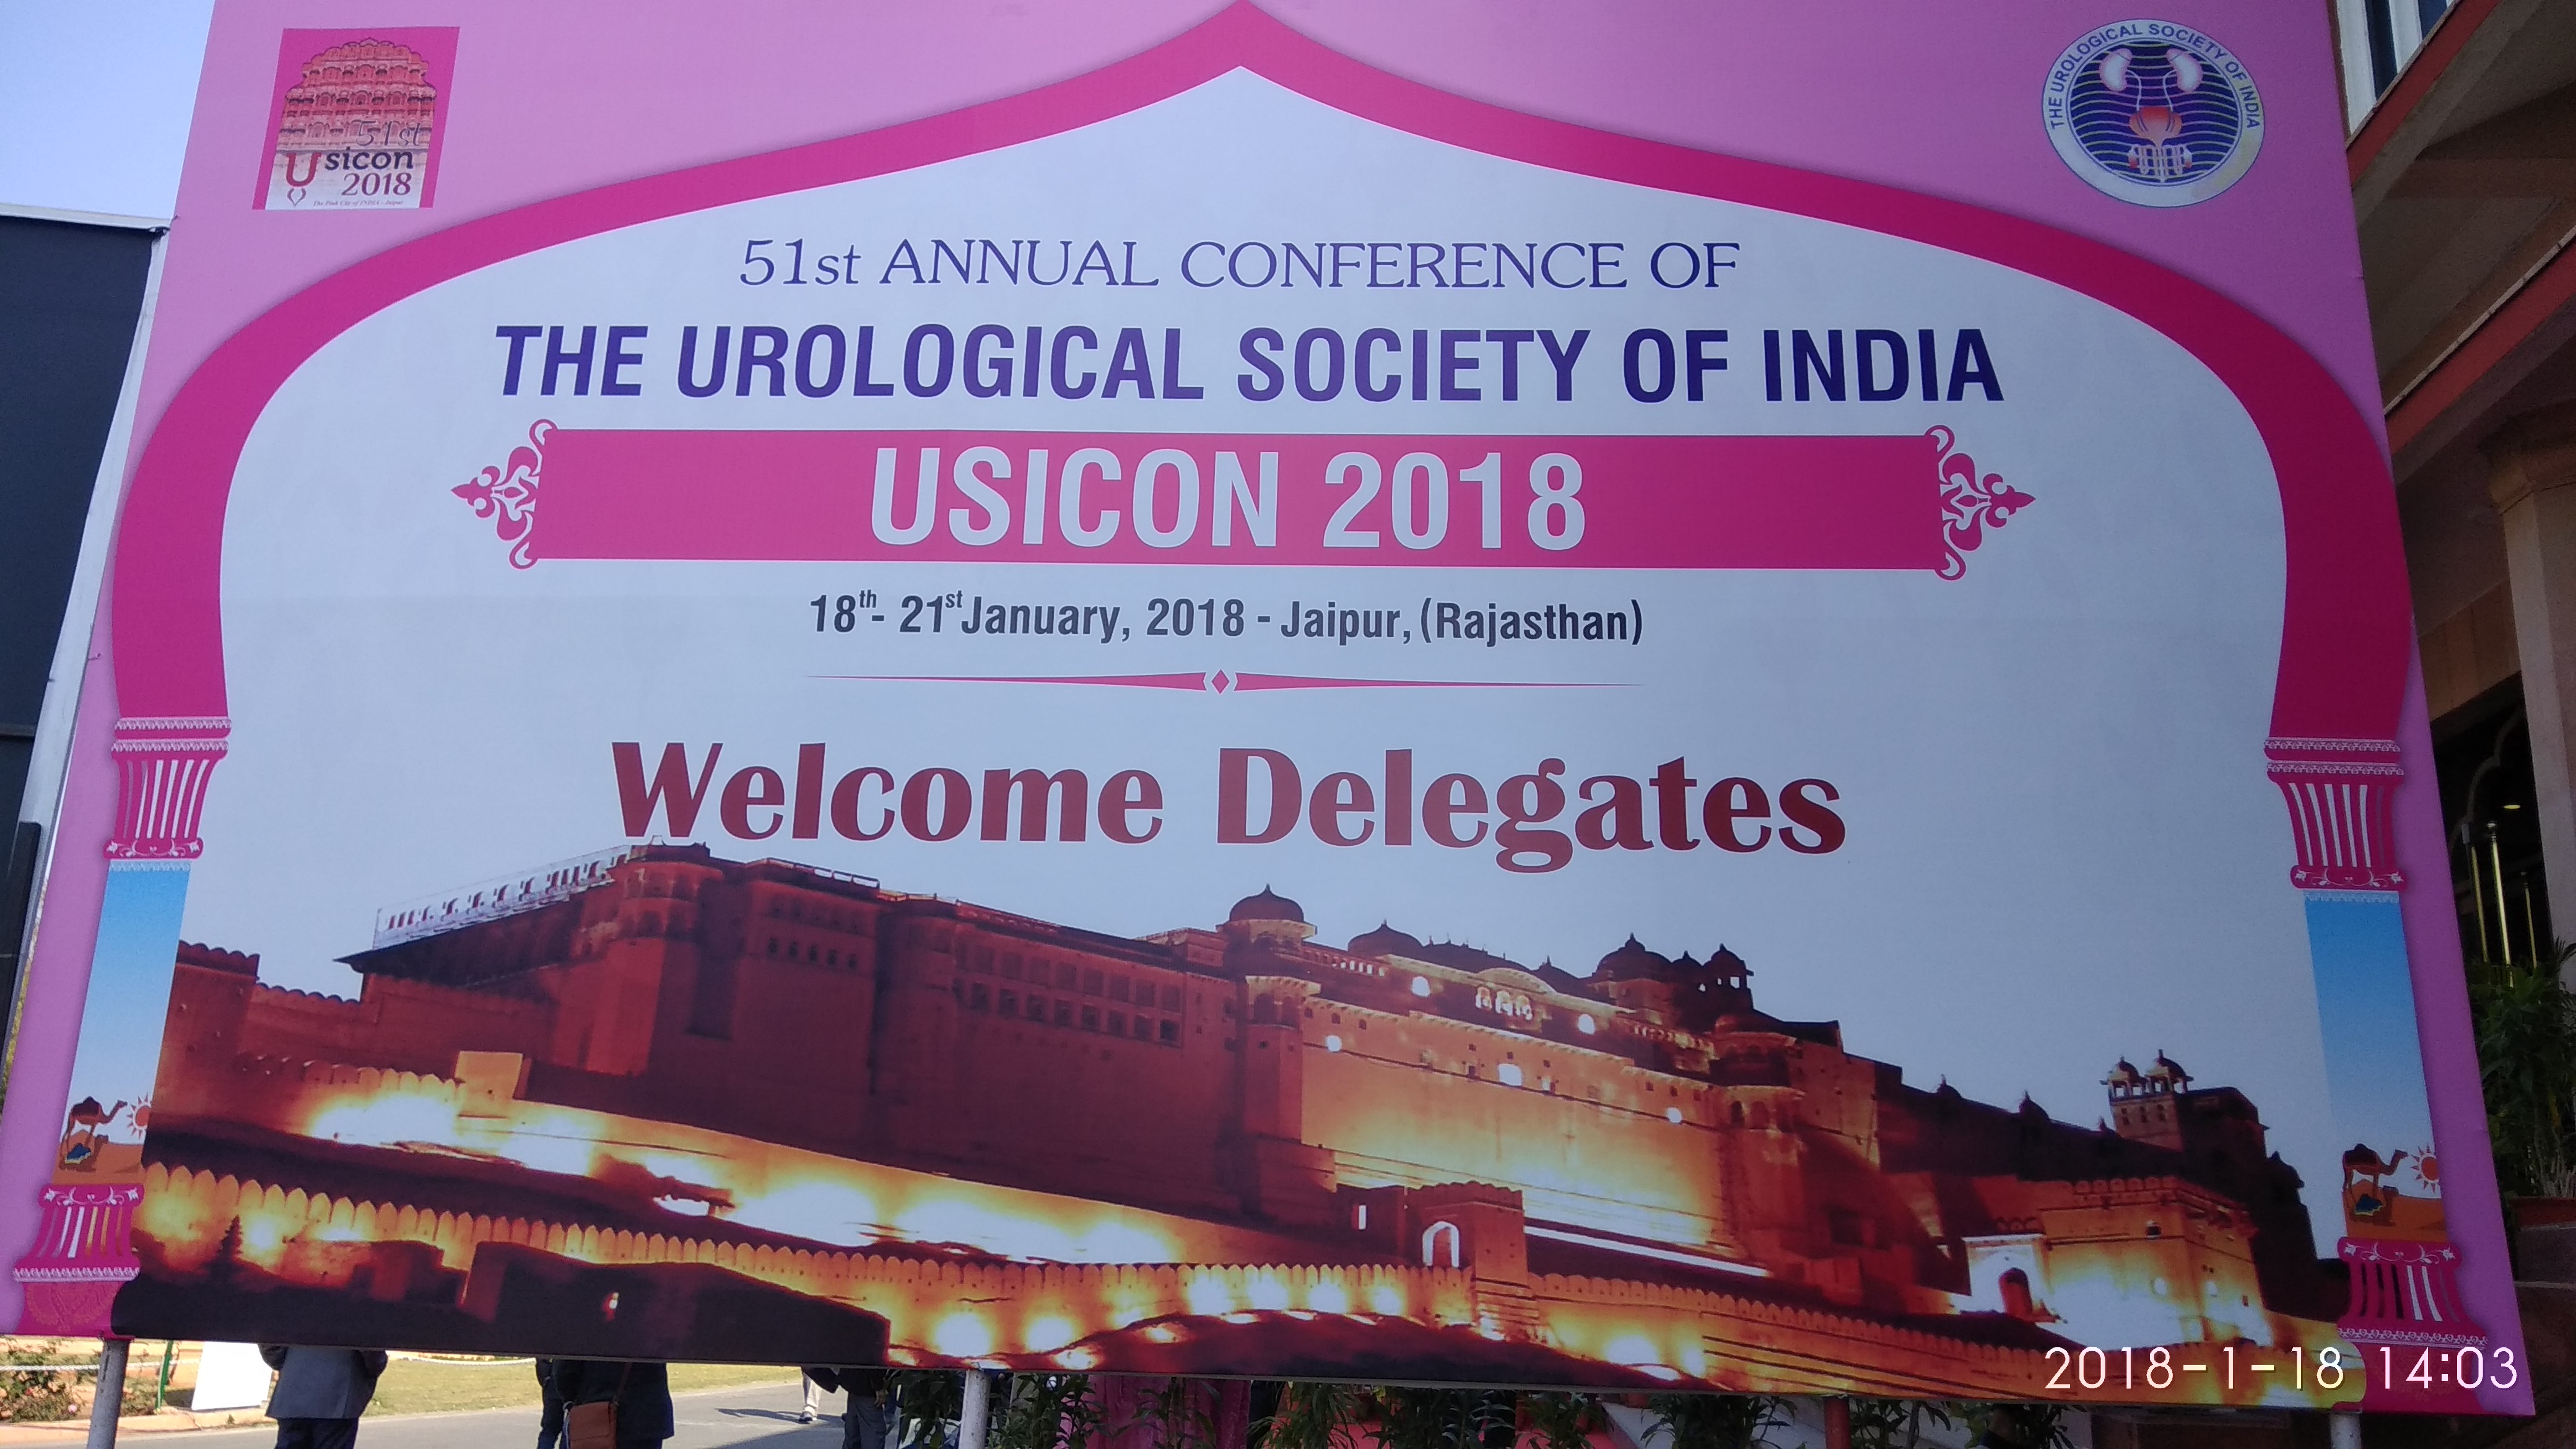 Conference of The Urological